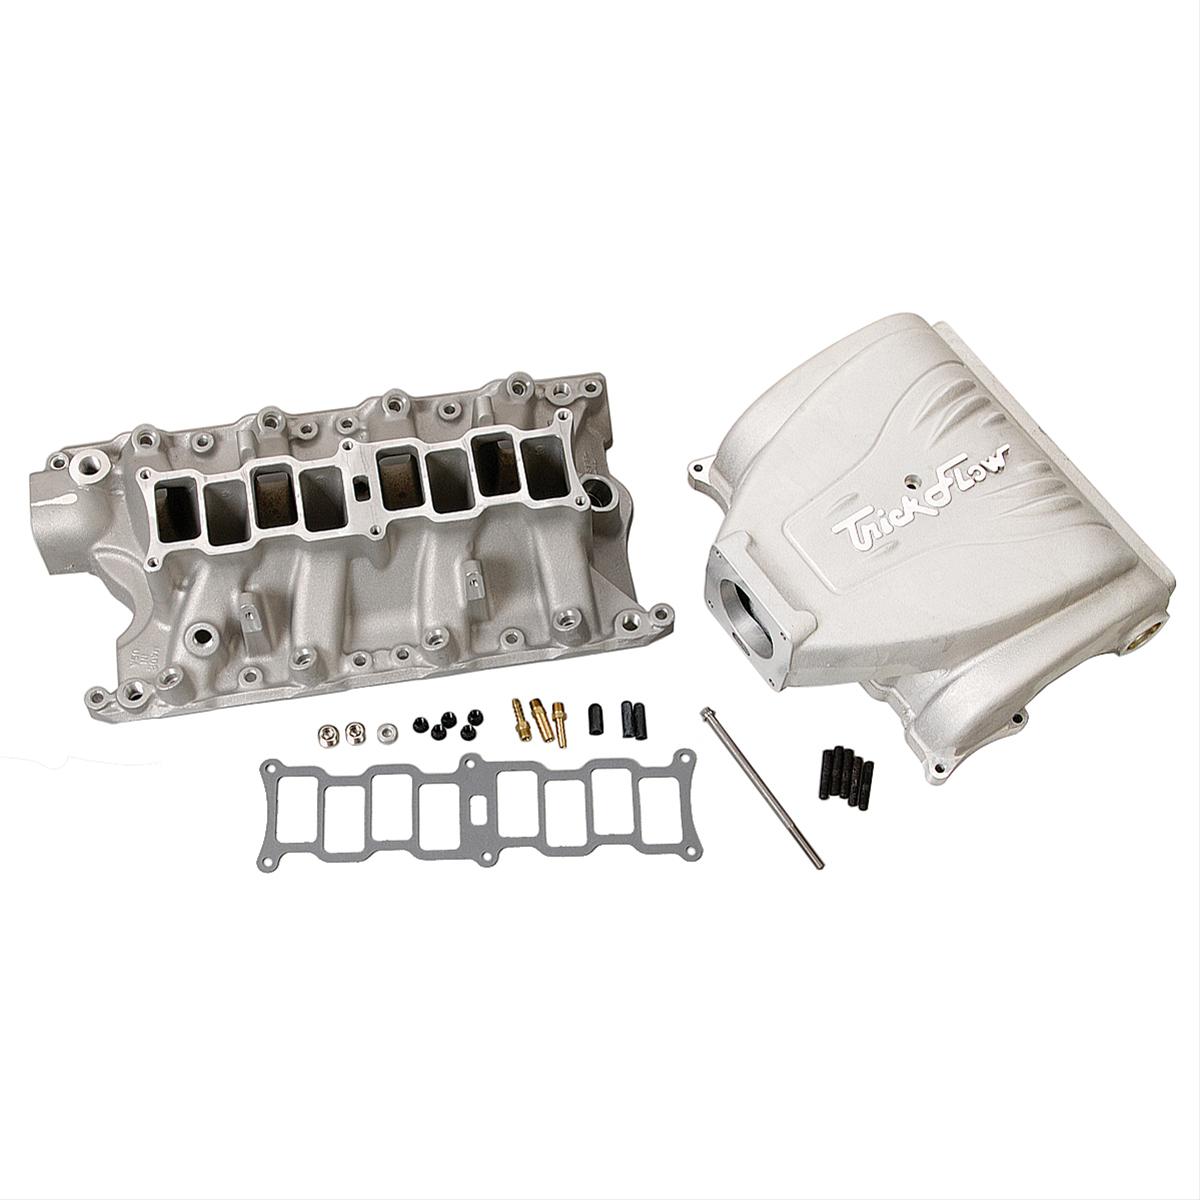 Free Shipping - Trick Flow® R-Series EFI Intake Manifolds for Ford...